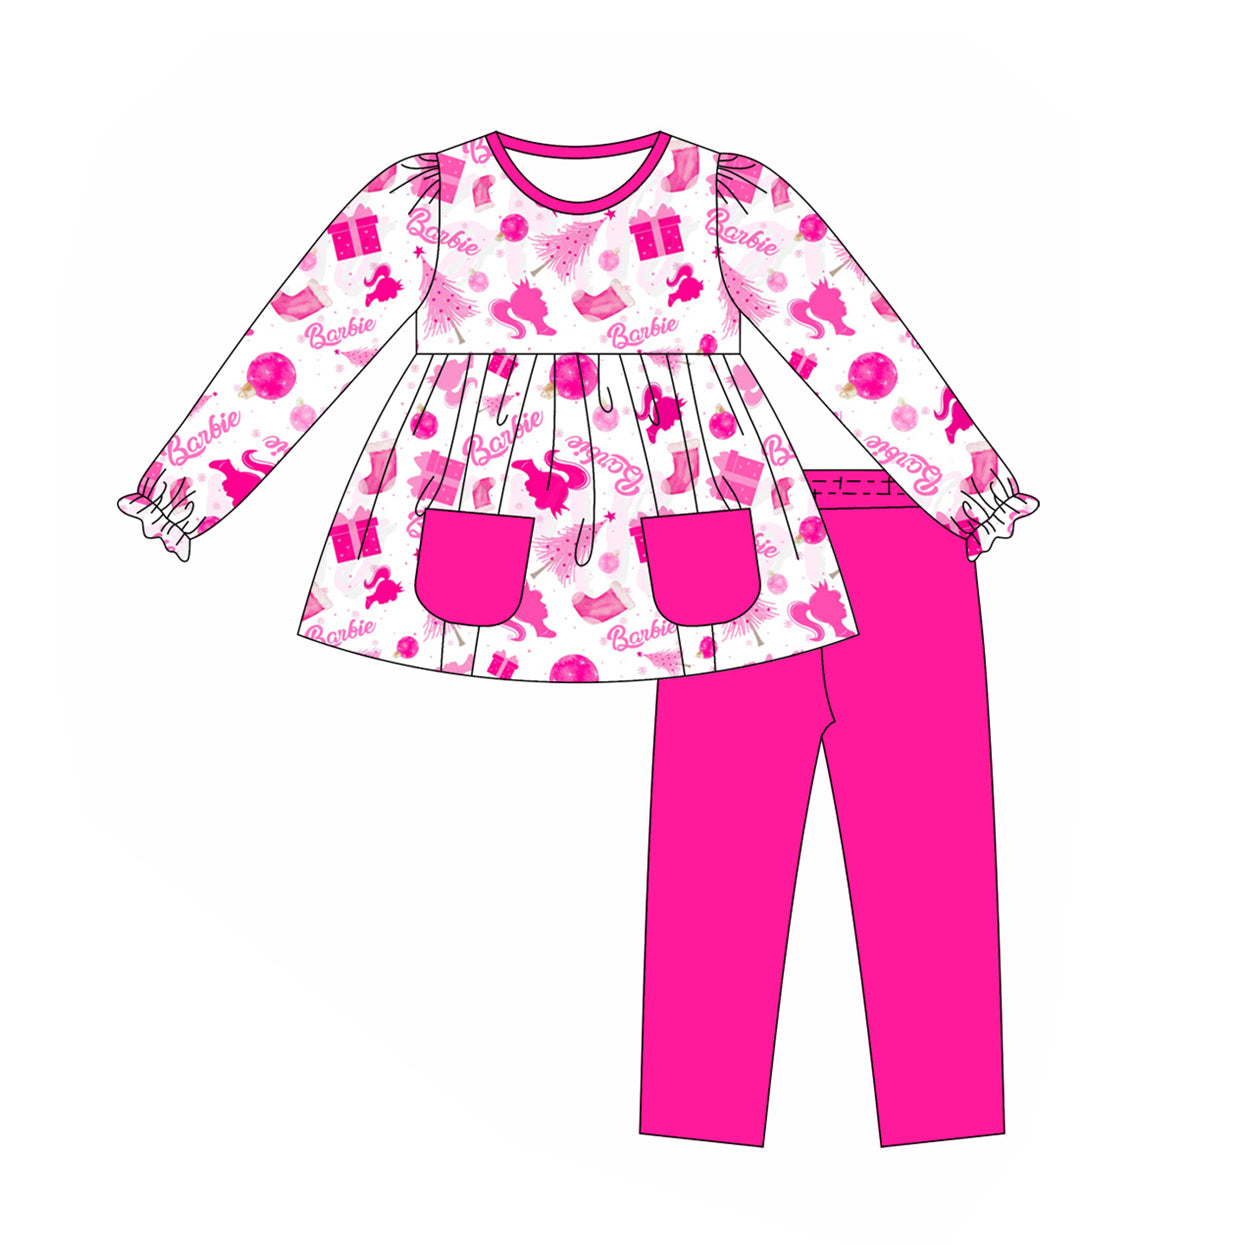 No moq GLP1431 Pre-order Size 3-6m to 14-16t baby girl clothes long sleeve top with trousers kids autumn set